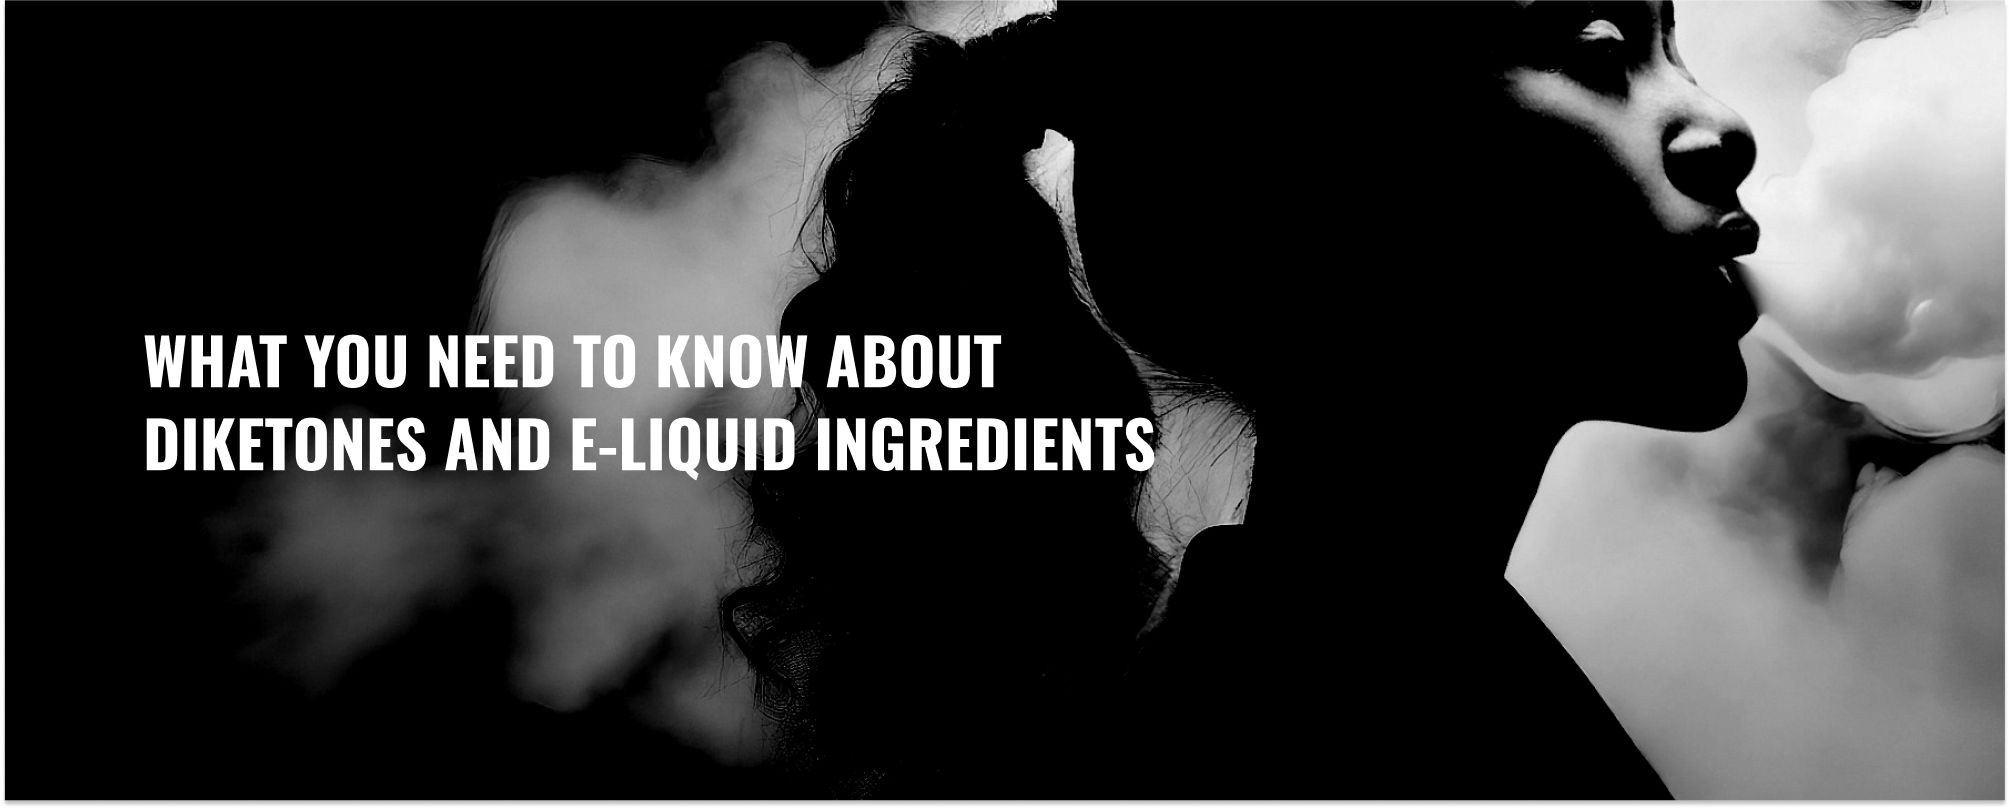 What You Need To Know About Diketones And E-Liquid Ingredients